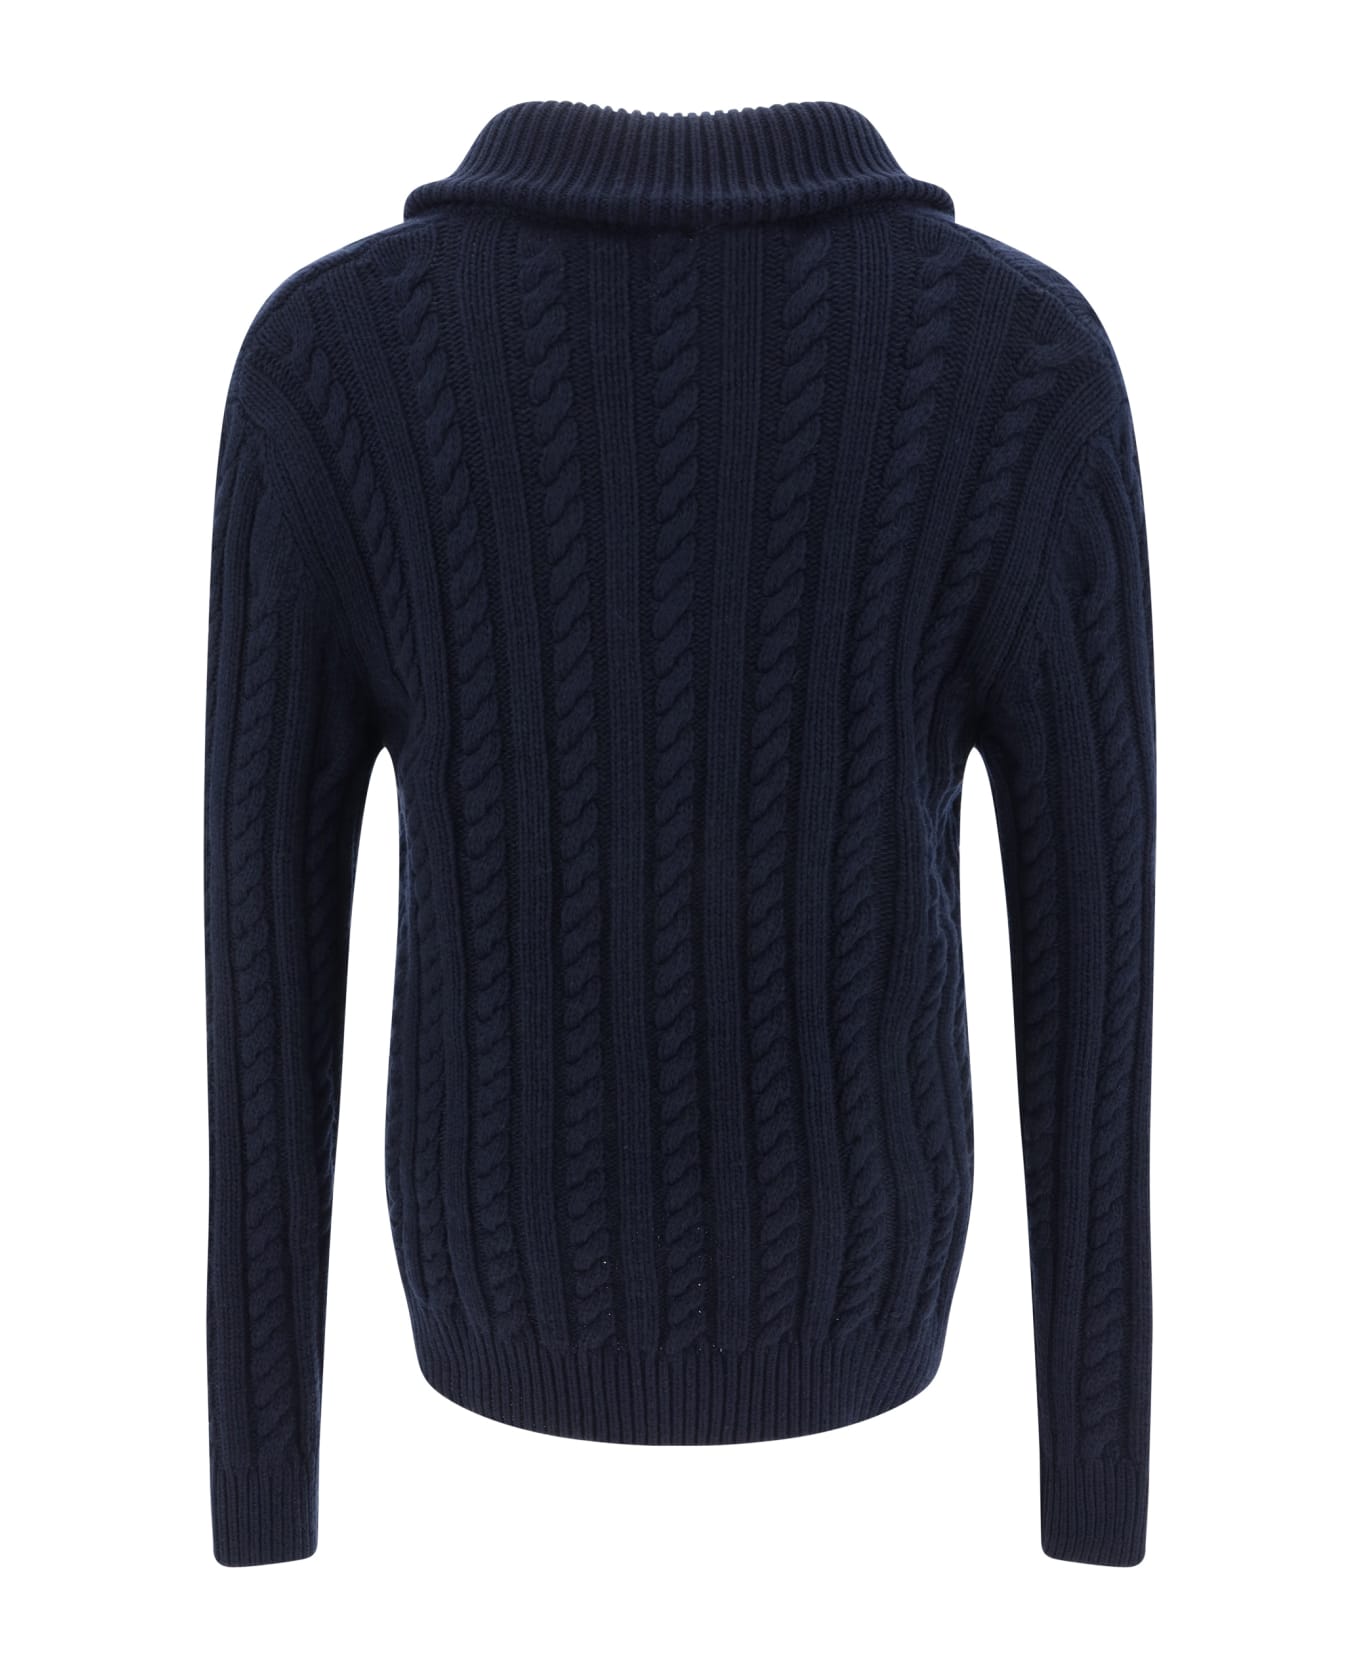 Valentino Cable Knit Sweater - Navy